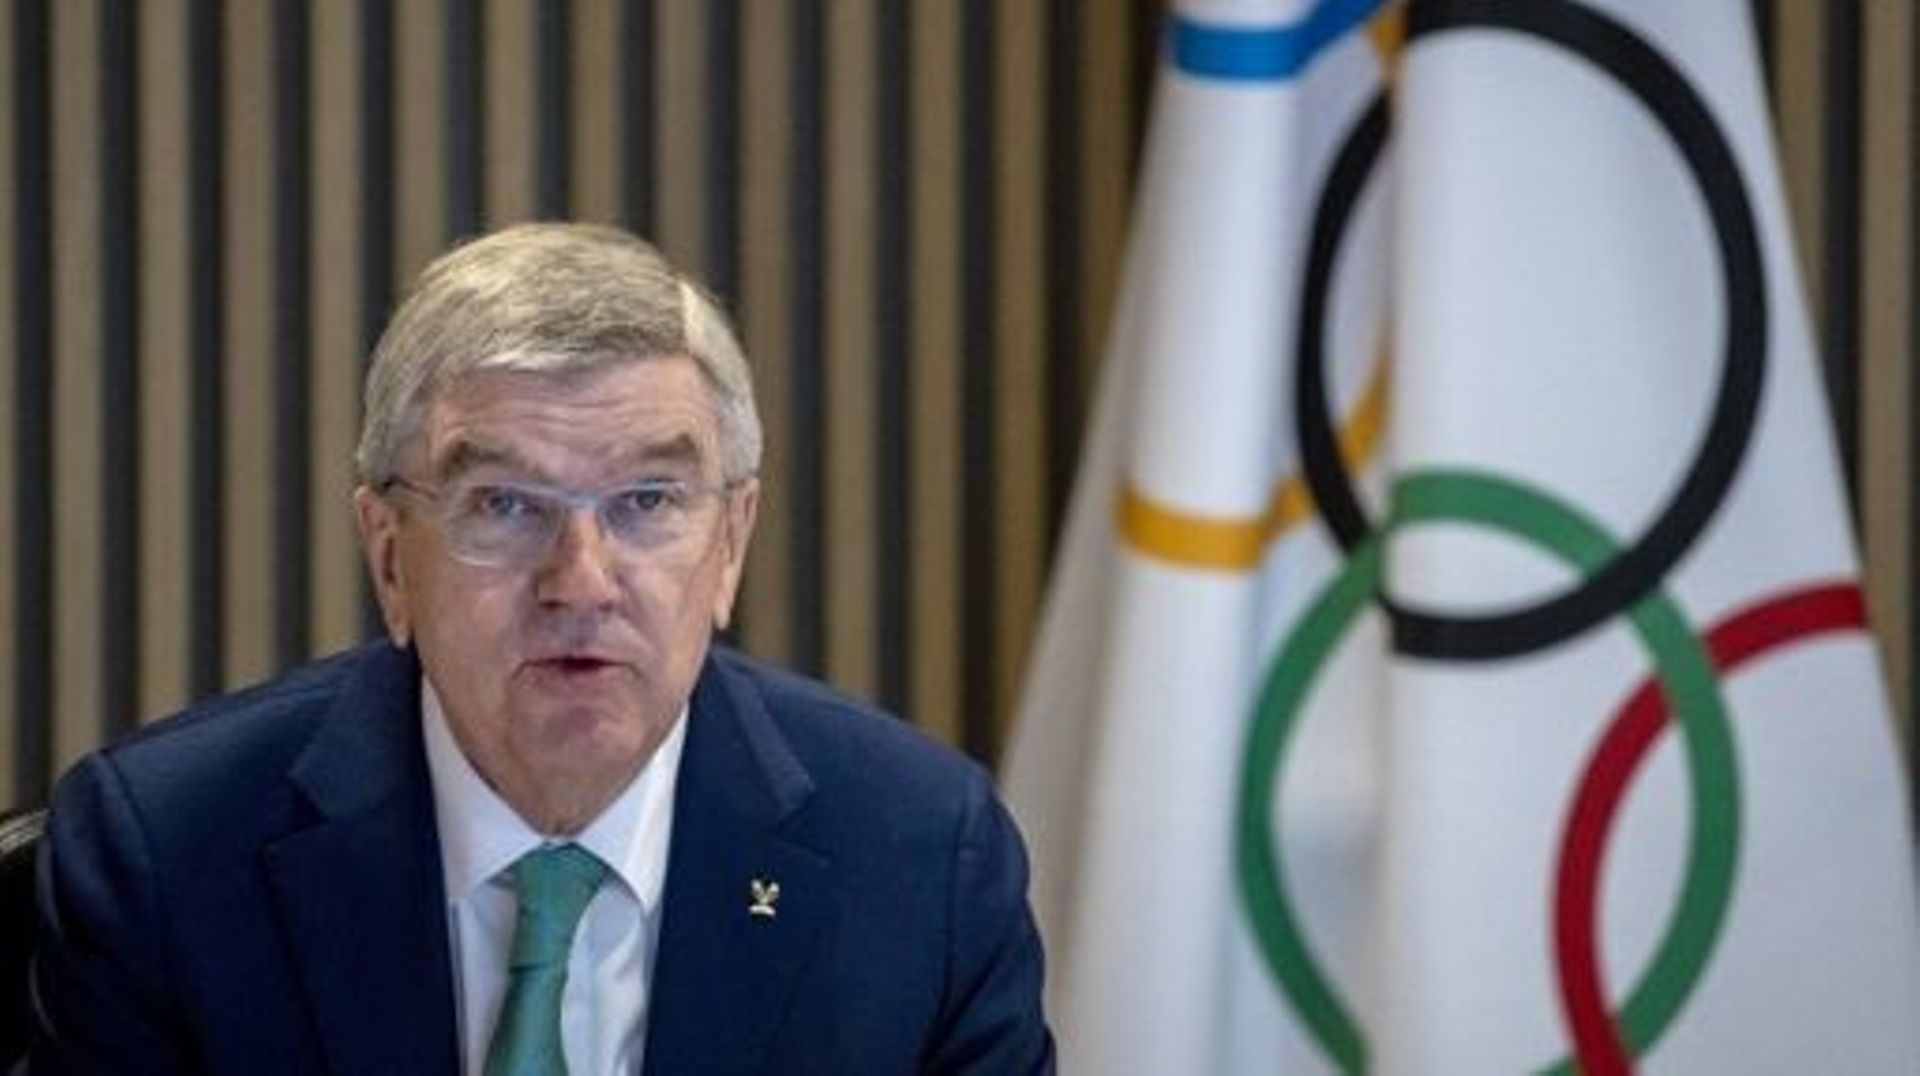 International Olympic Committee (IOC) President Thomas Bach speaks at the start of the IOC Executive Board meeting at the Olympic House in Lausanne, Switzerland on December 5, 2022.  DENIS BALIBOUSE / POOL / AFP